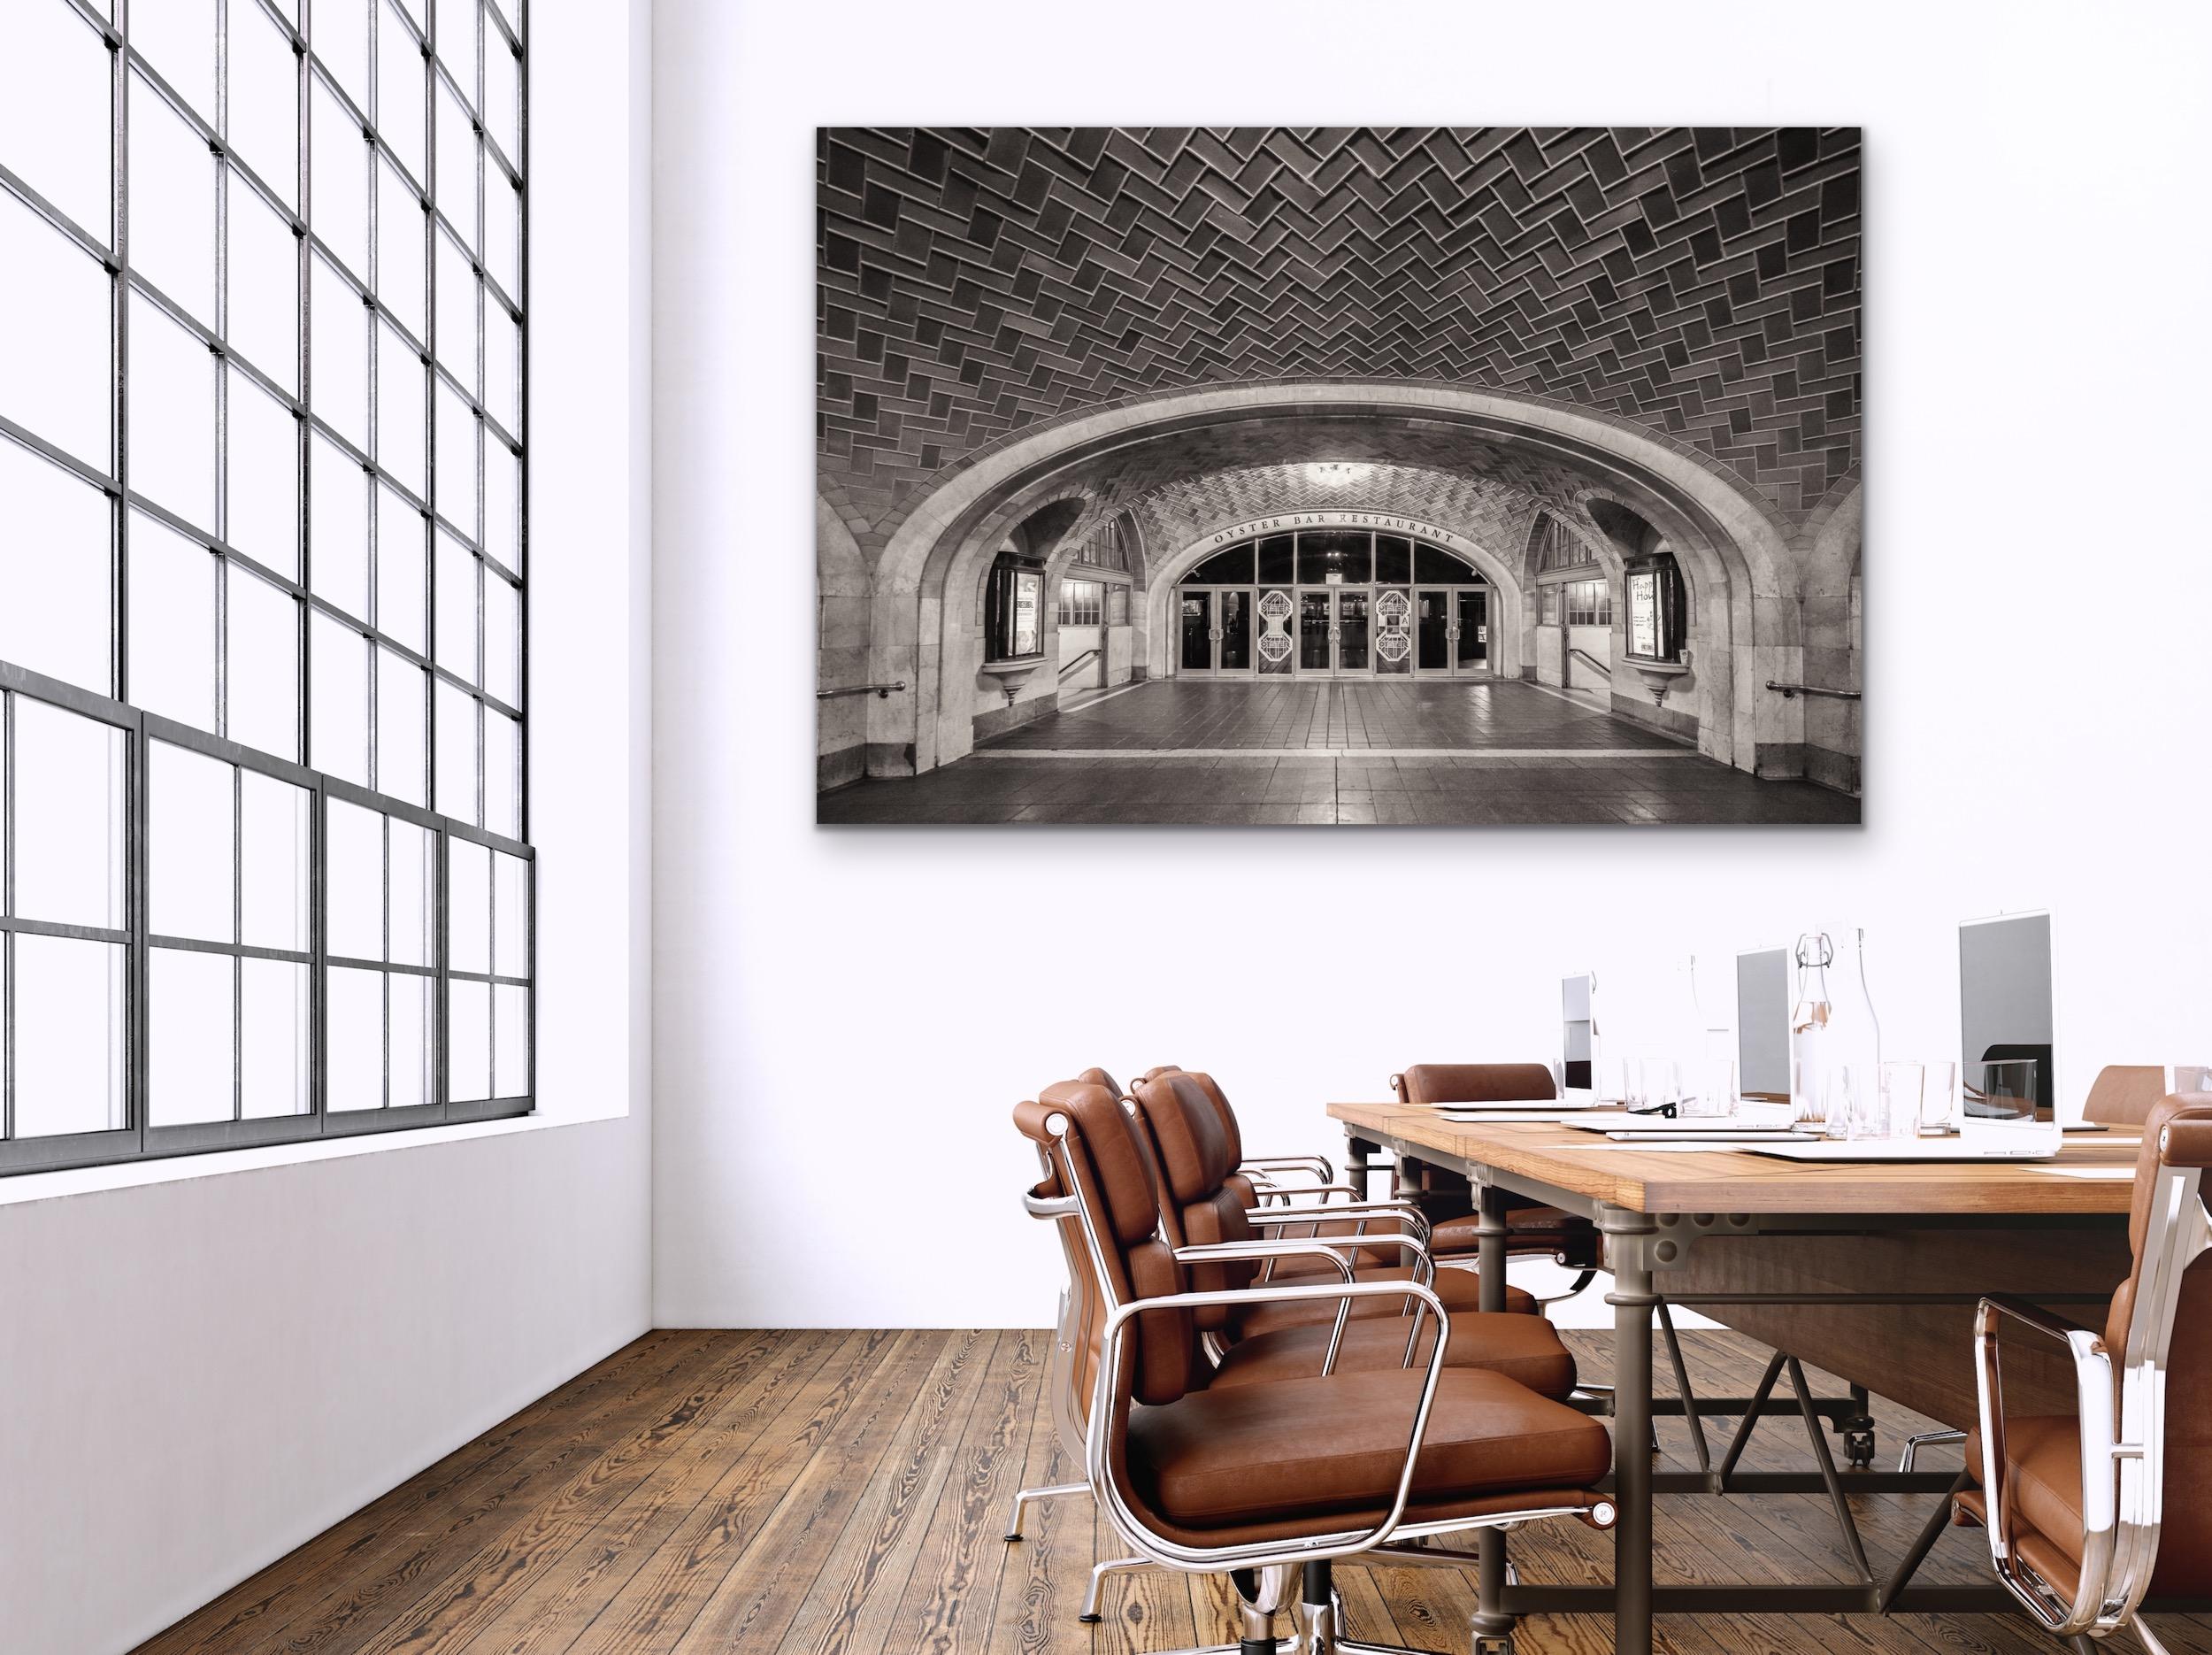 This black and white, contemporary architectural photograph by Peter Mendelson features the Oyster Bar Restaurant in Grand Central Station in Manhattan. Two staircases lead to a lower level on either side of the entry to the restaurant, while